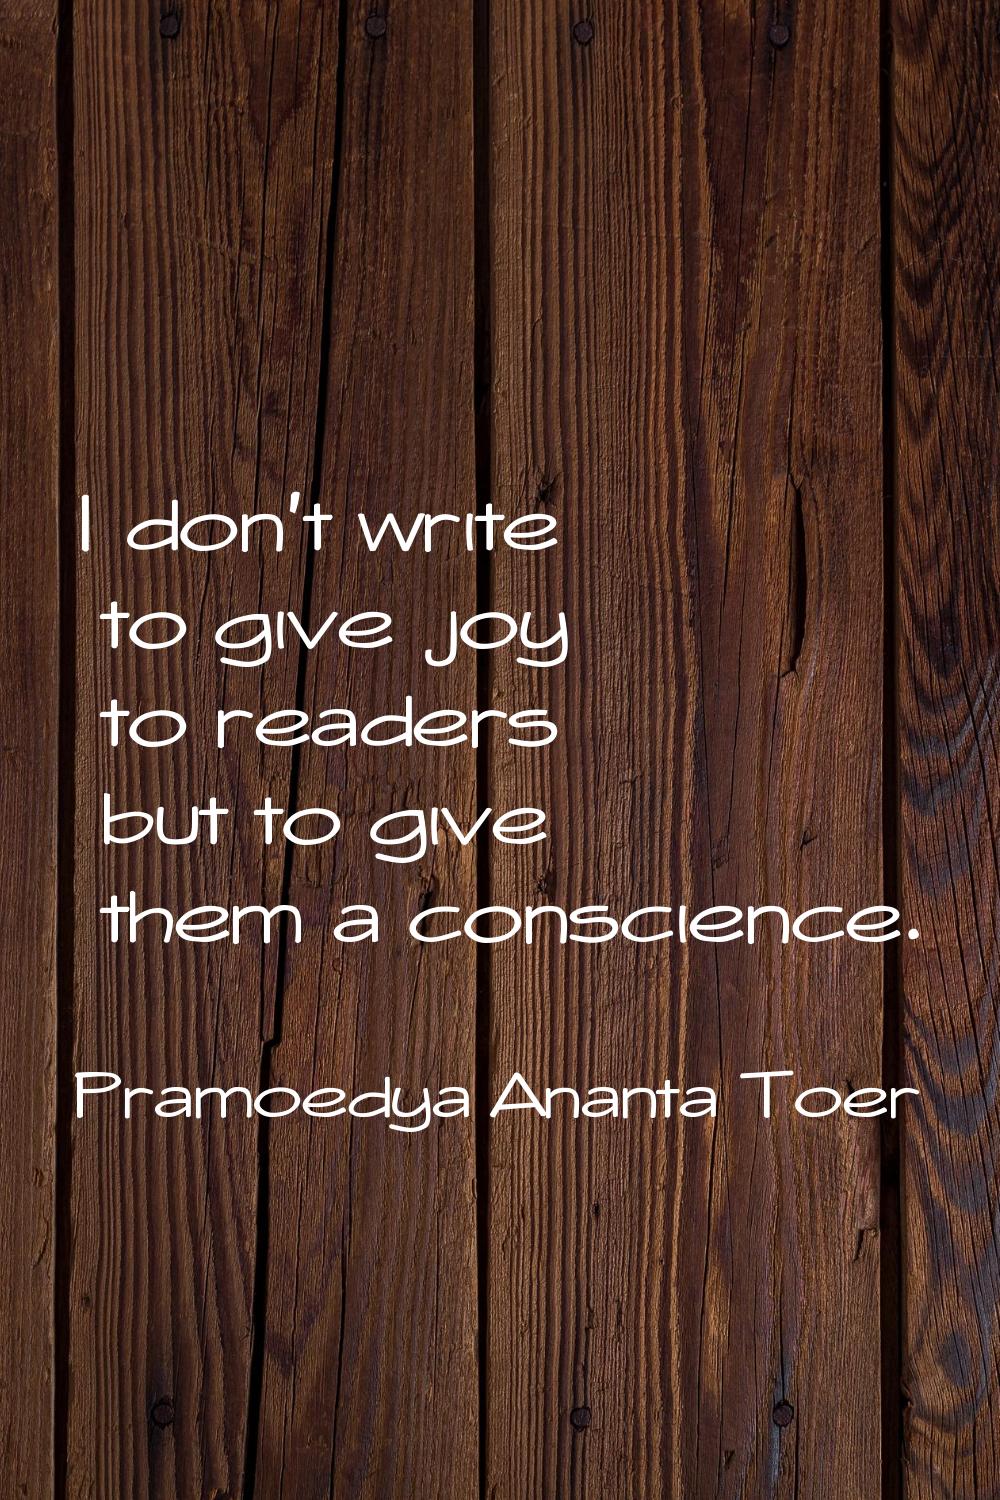 I don't write to give joy to readers but to give them a conscience.